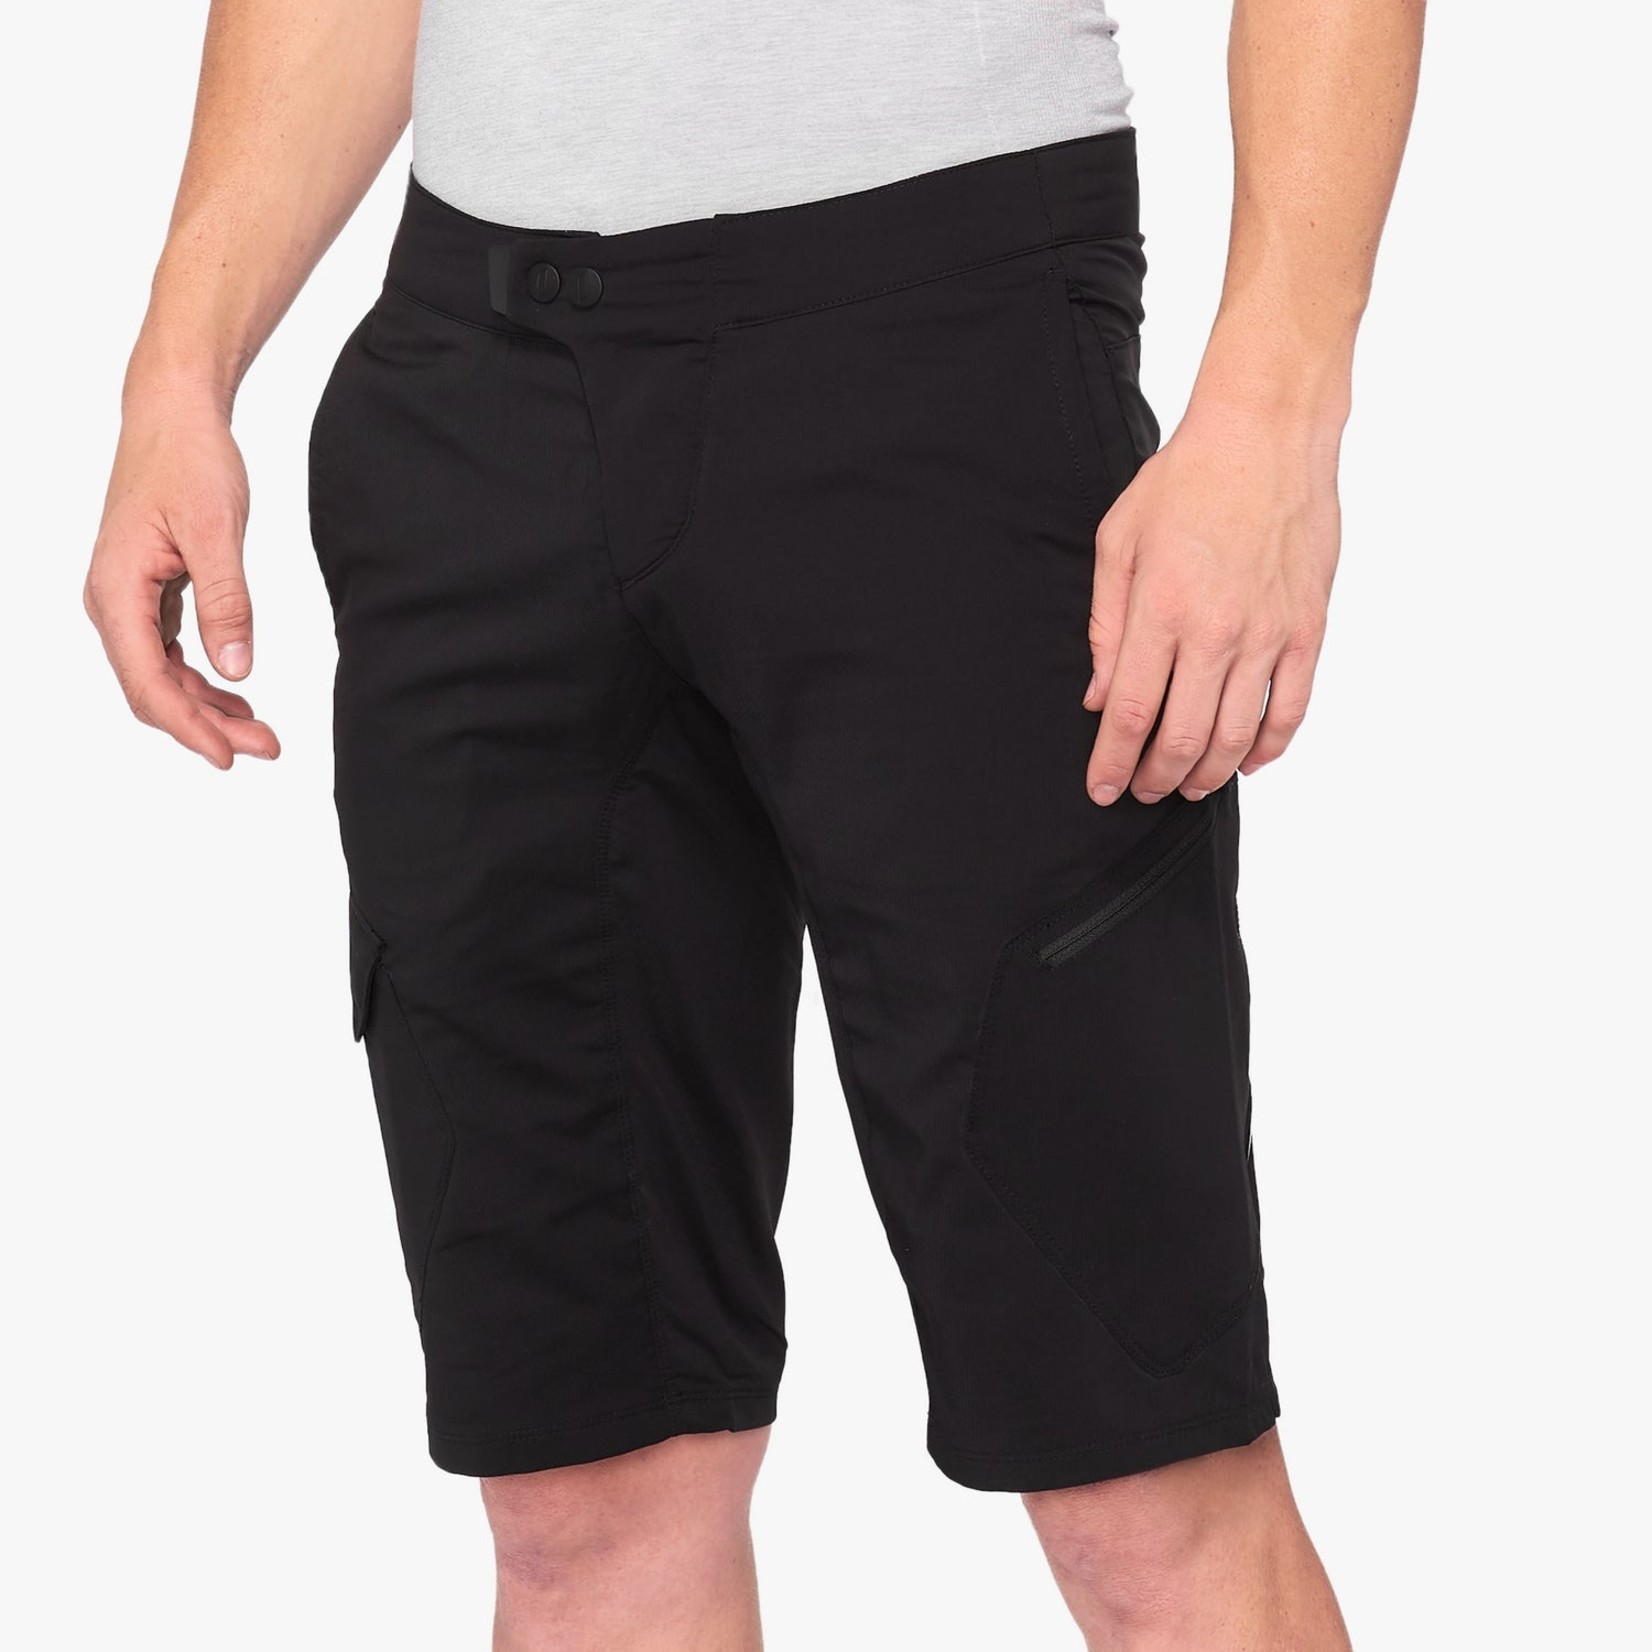 100% RIDECAMP Shorts with Liner